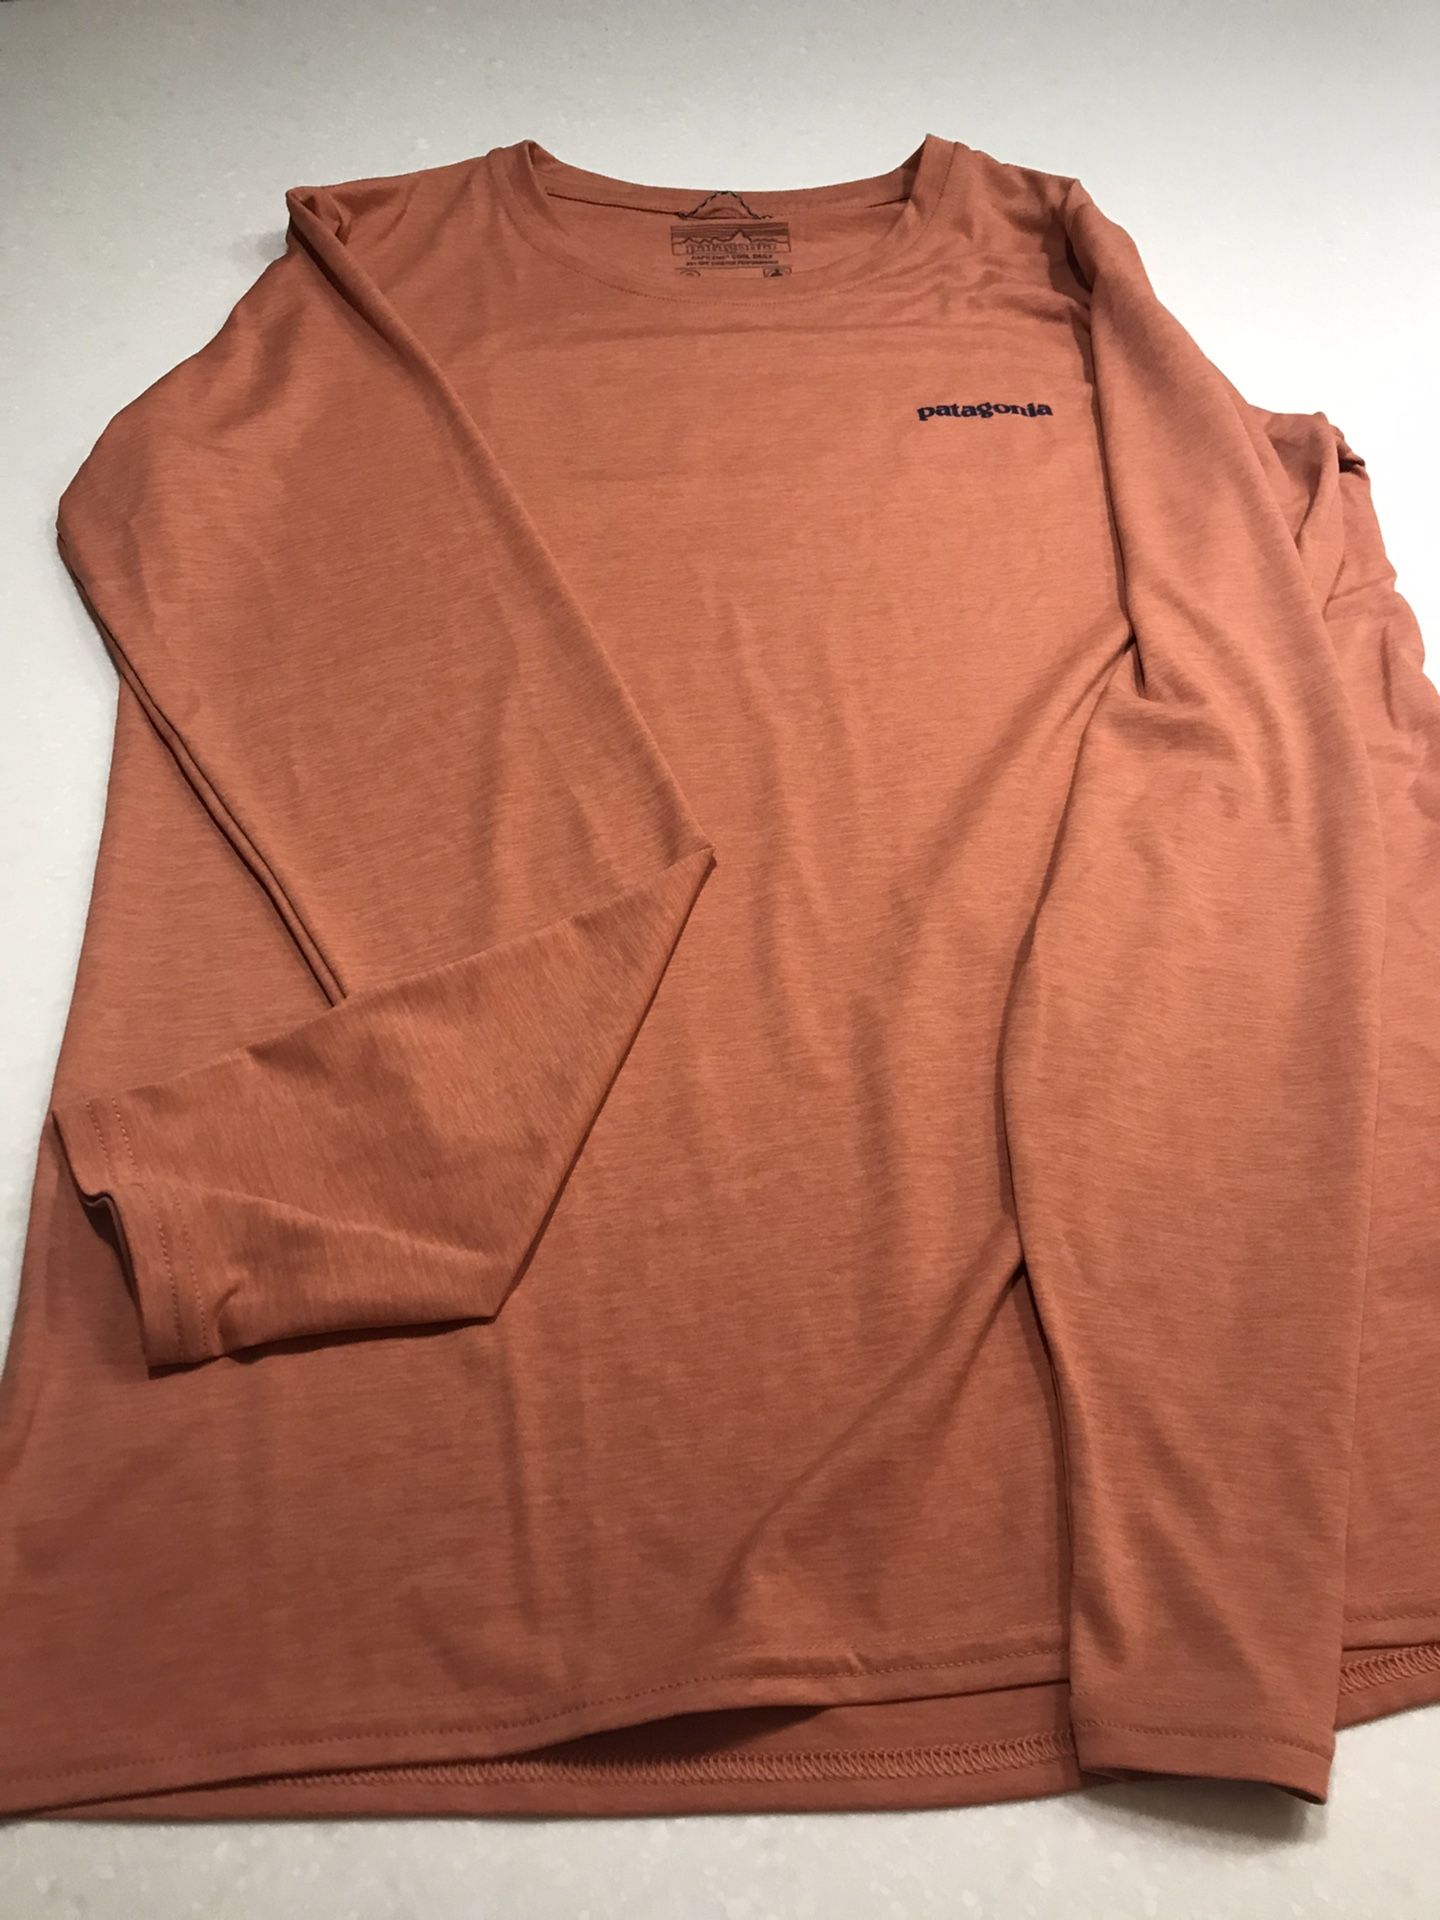 Patagonia Long sleeved shirt size small women’s